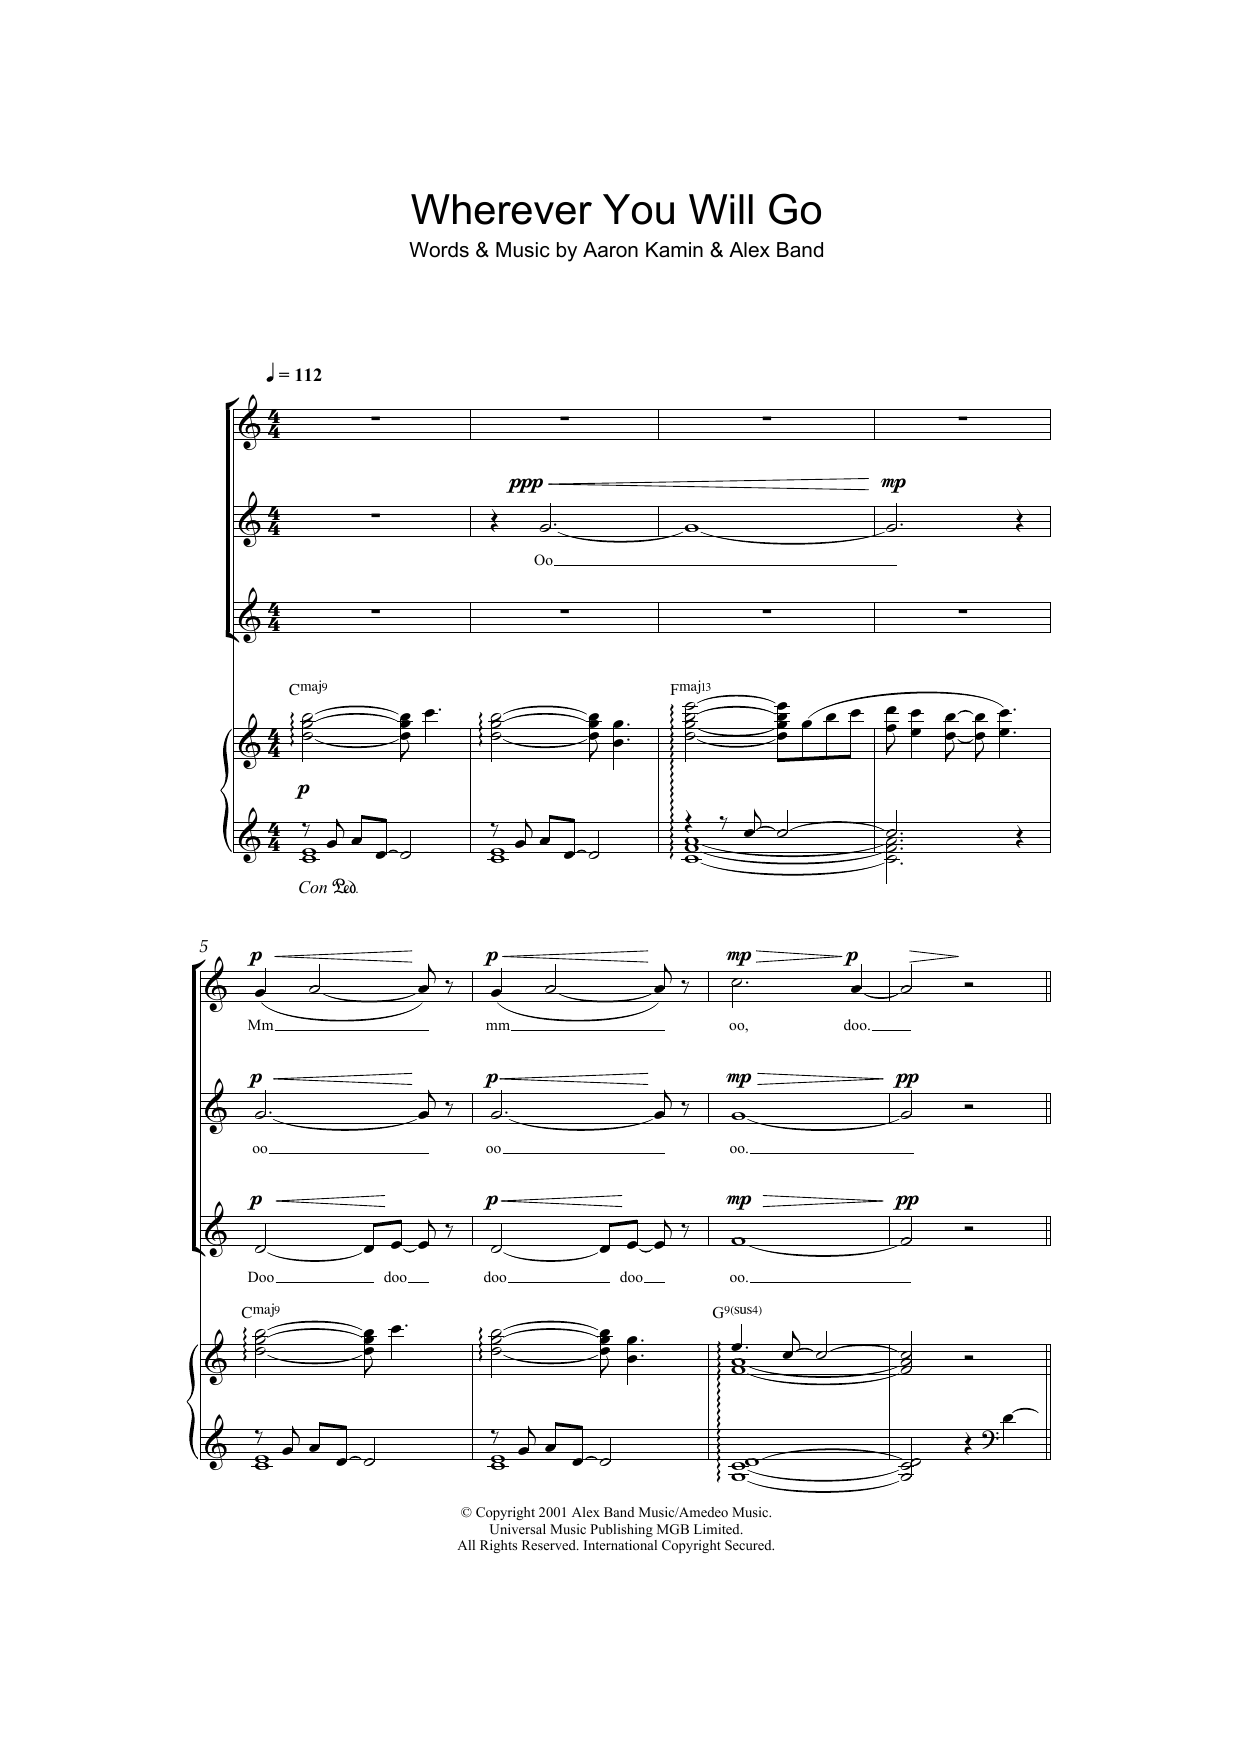 Download The Calling Wherever You Will Go Sheet Music